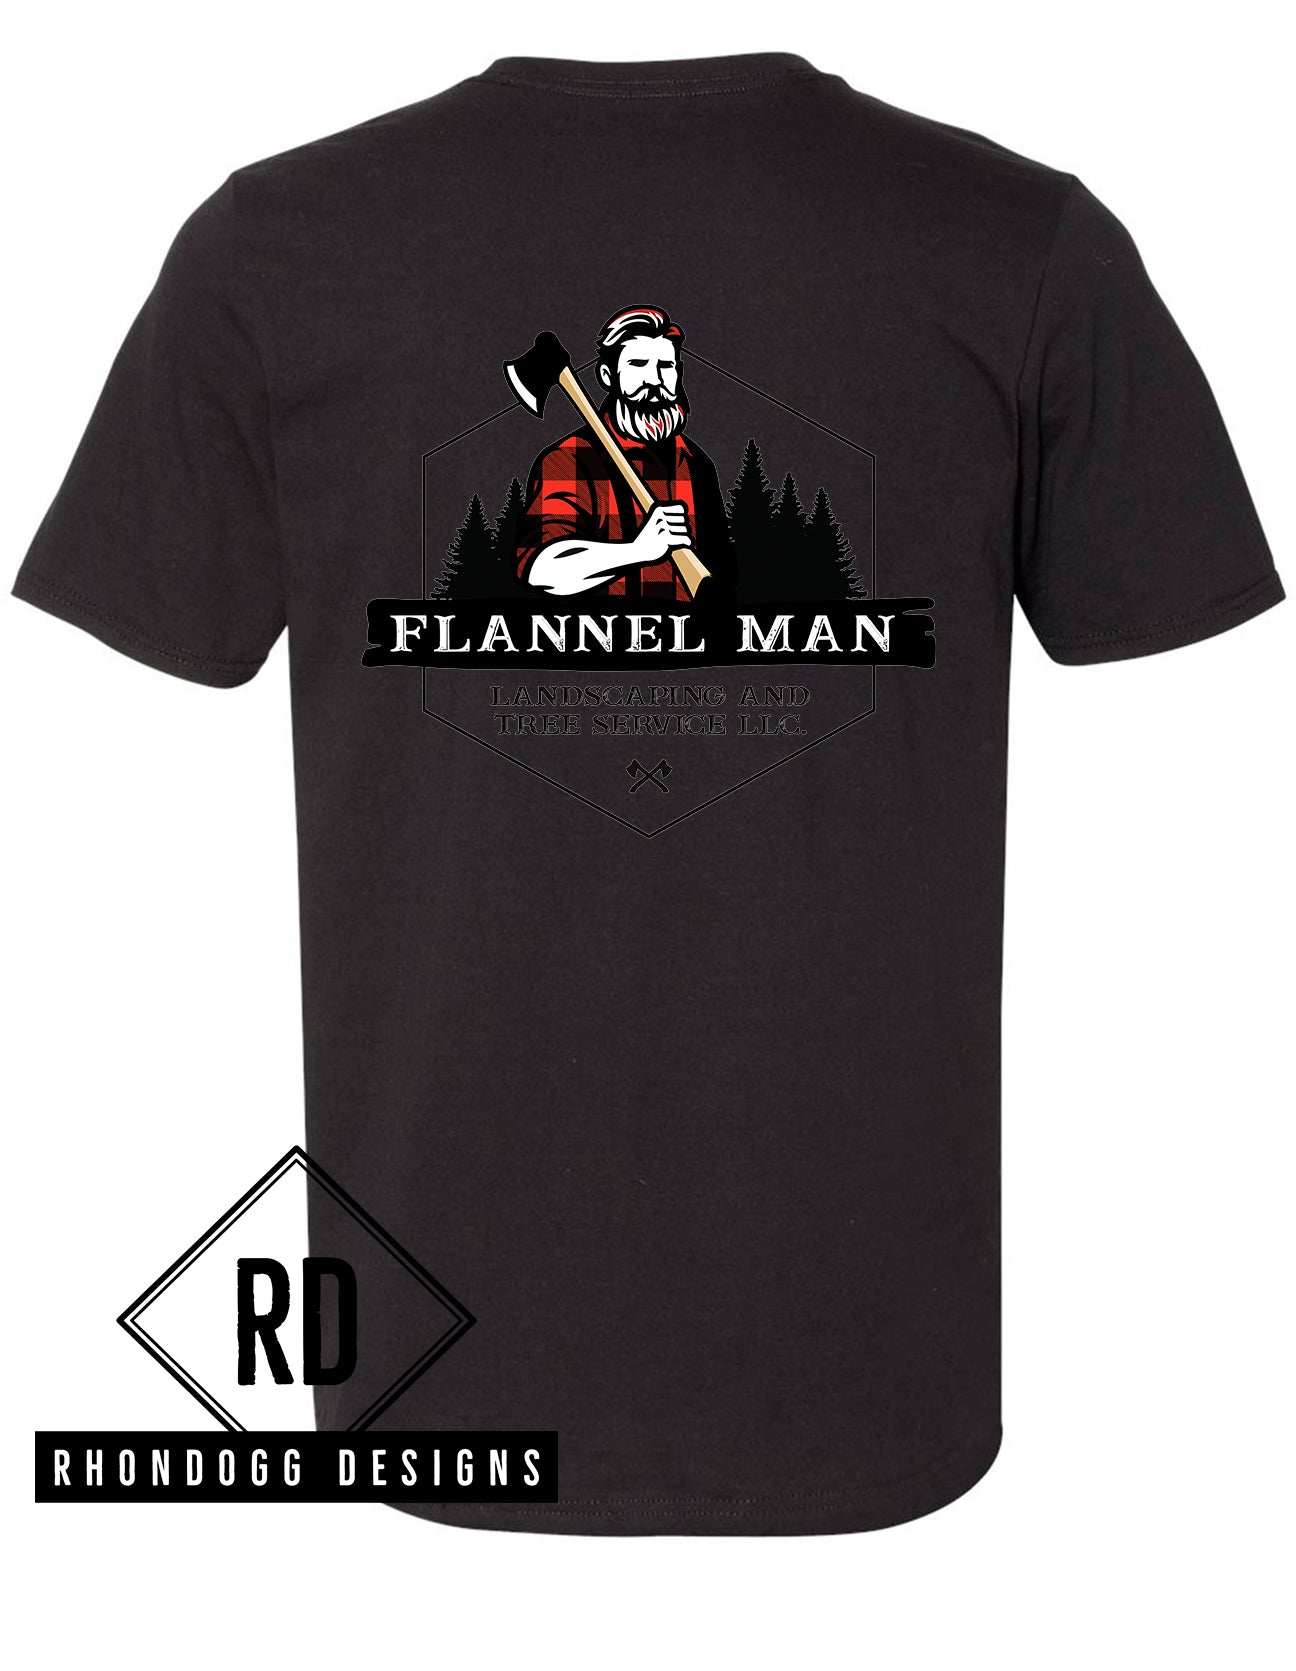 Flannel Man - Russell Athletic T-Shirt